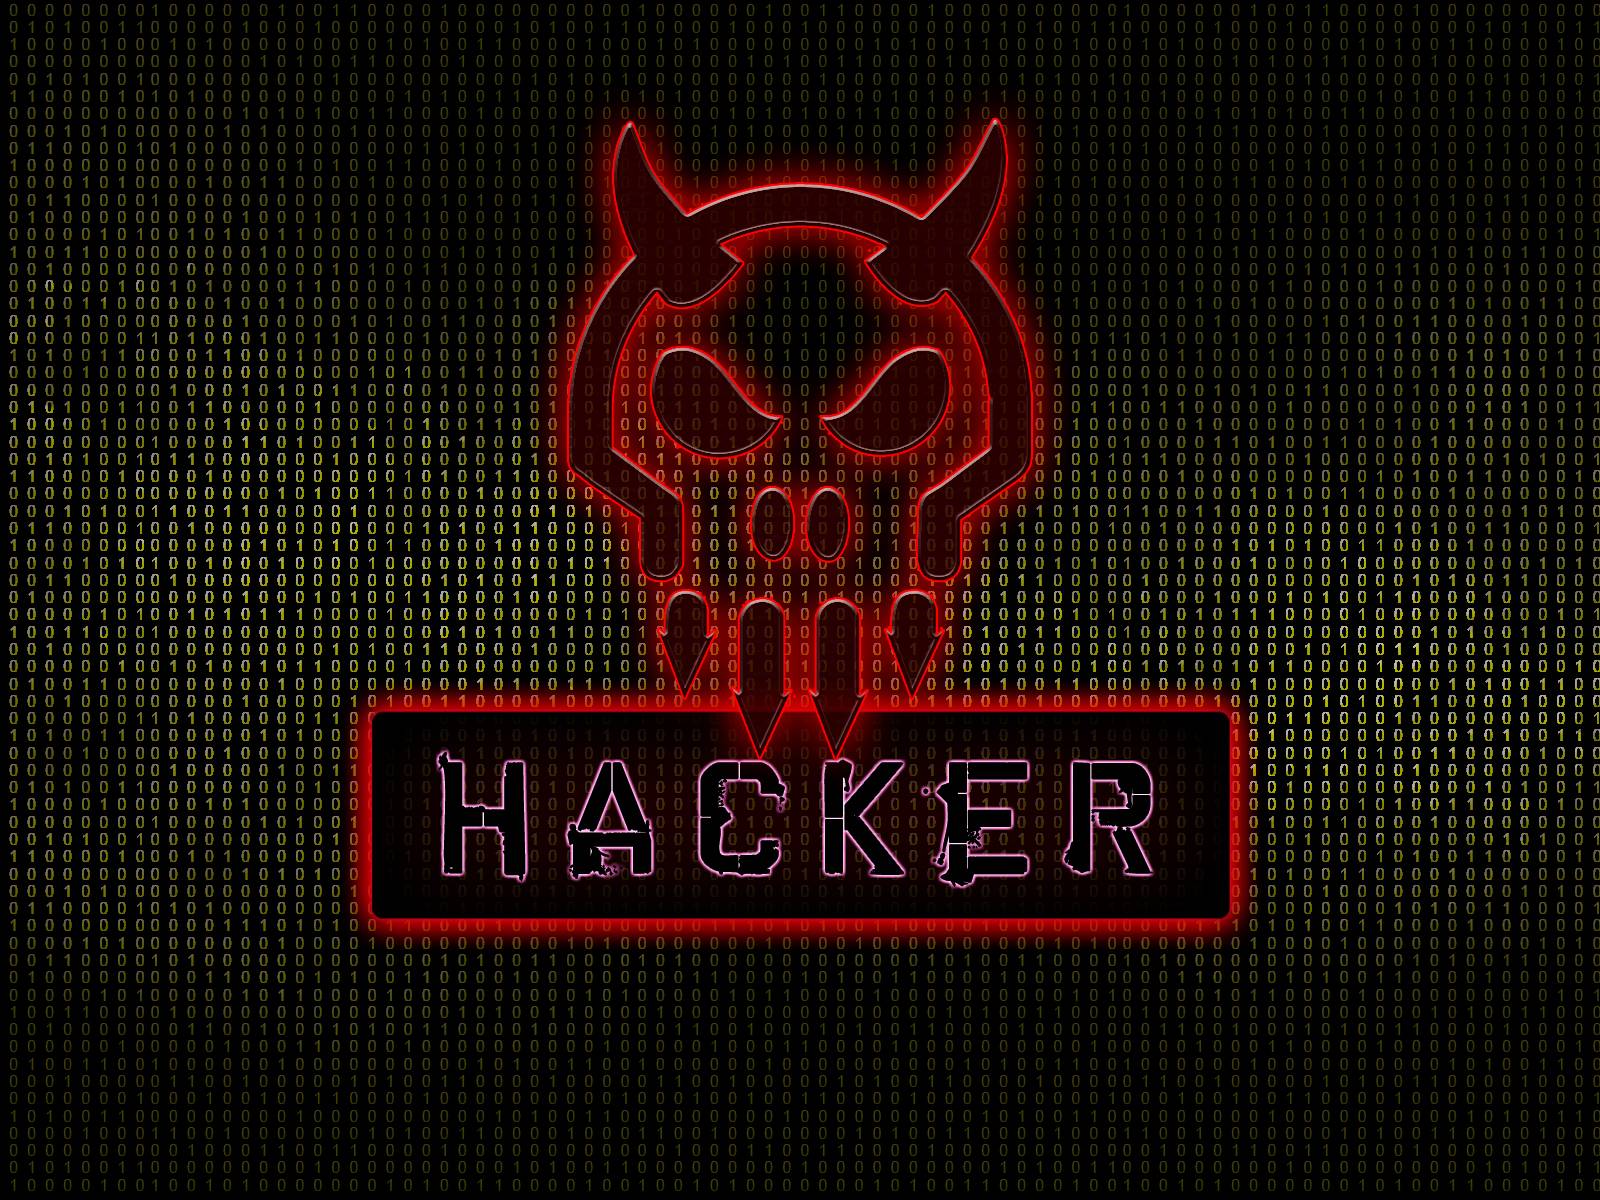 700+ Free Hacker & Cyber Images - Pixabay